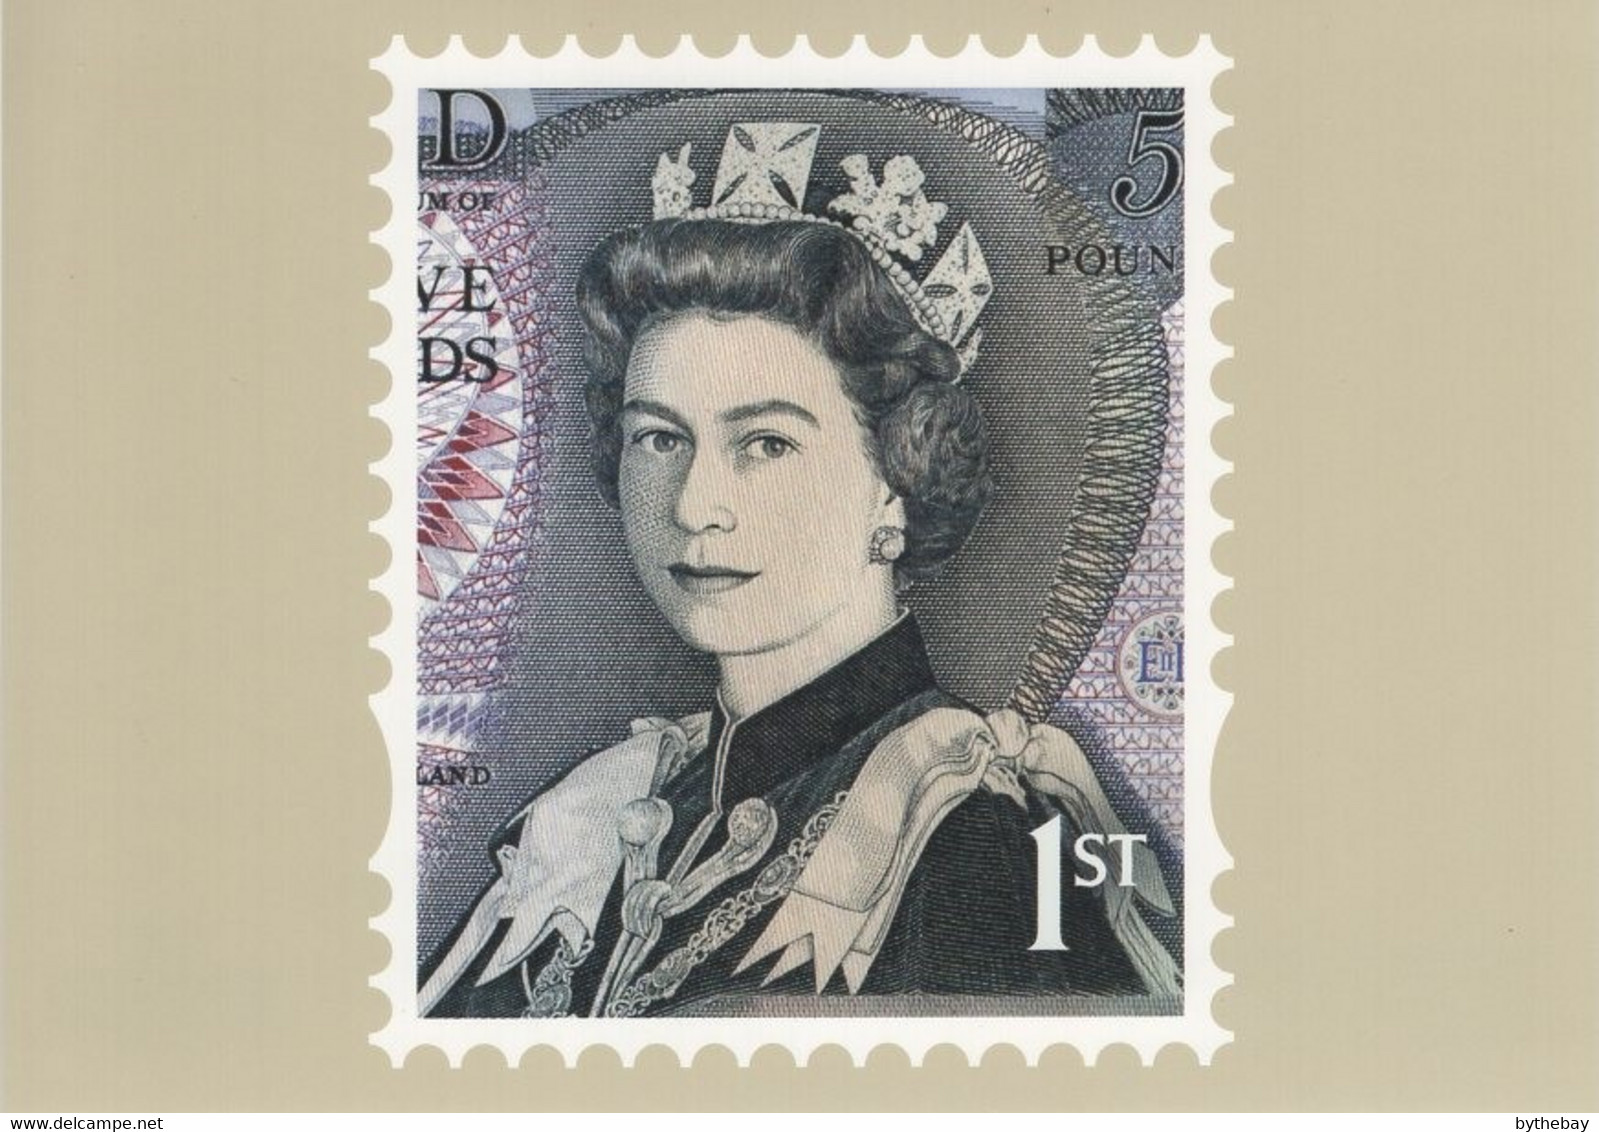 Great Britain 2012 PHQ Card Sc 2996c 1st QEII Image 1971 Bank Note - Carte PHQ